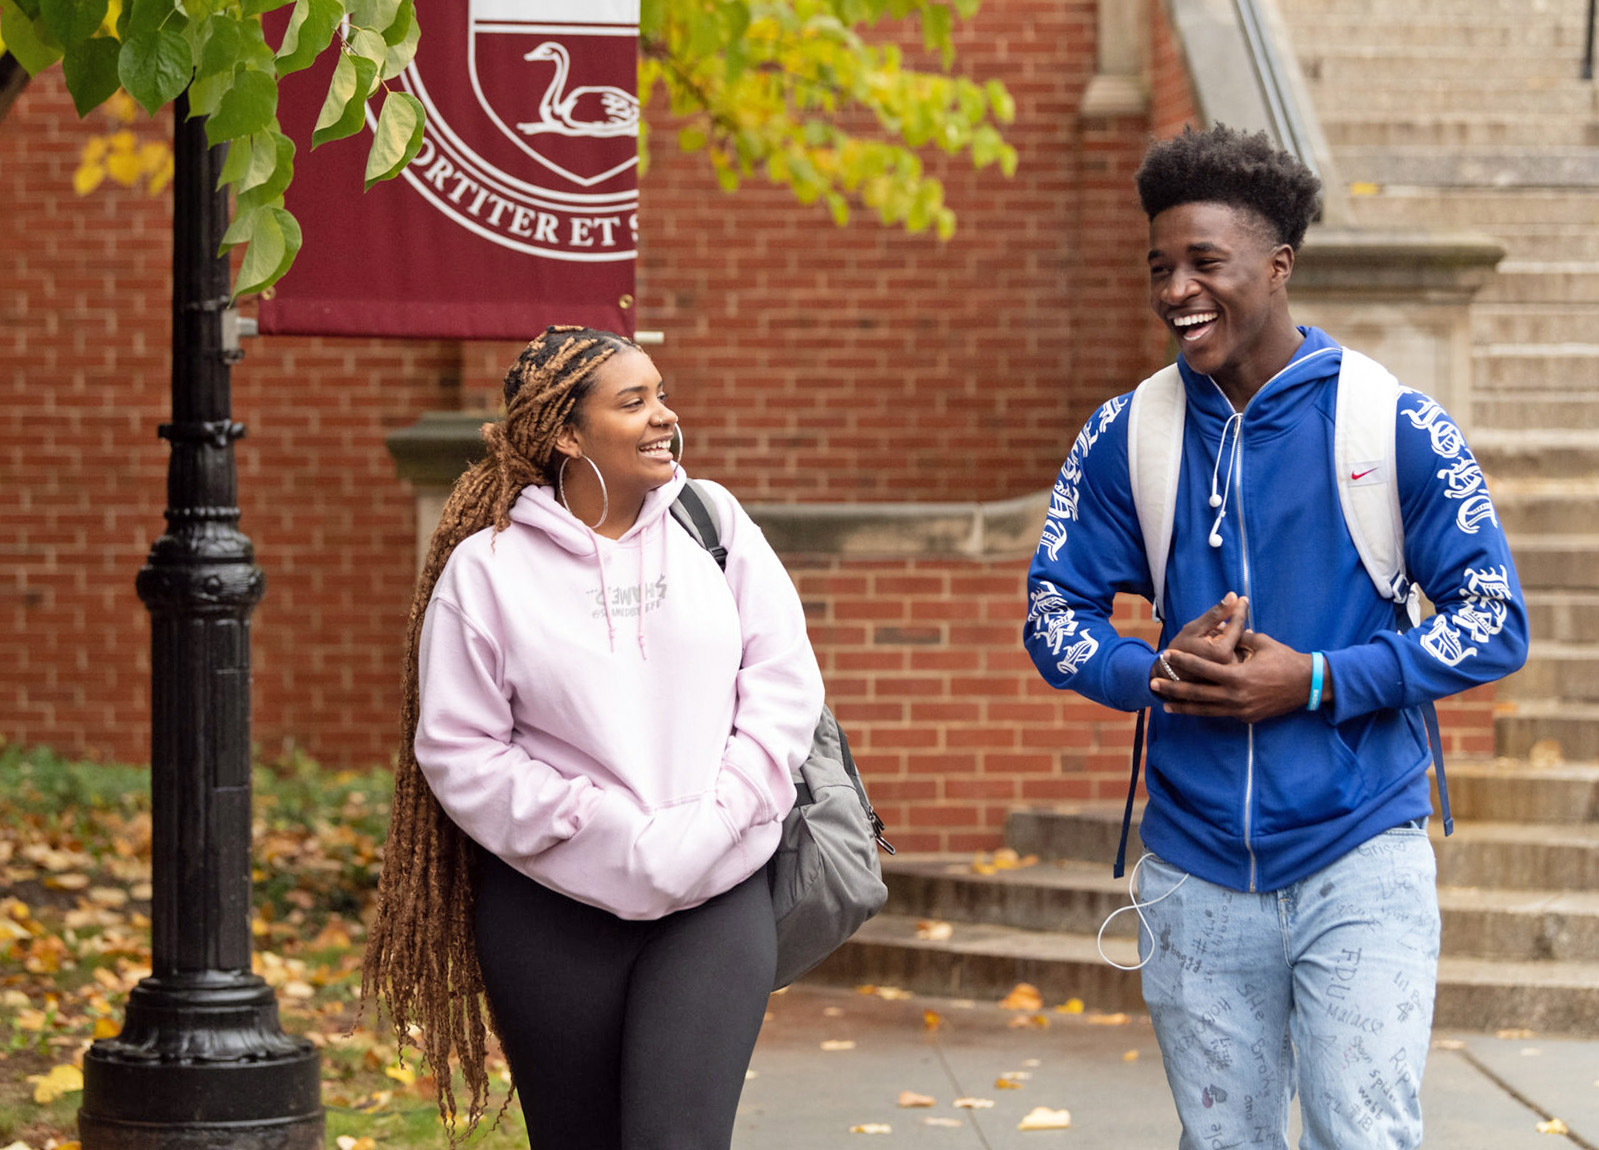 A female student and male student walk on campus, and share a laugh.